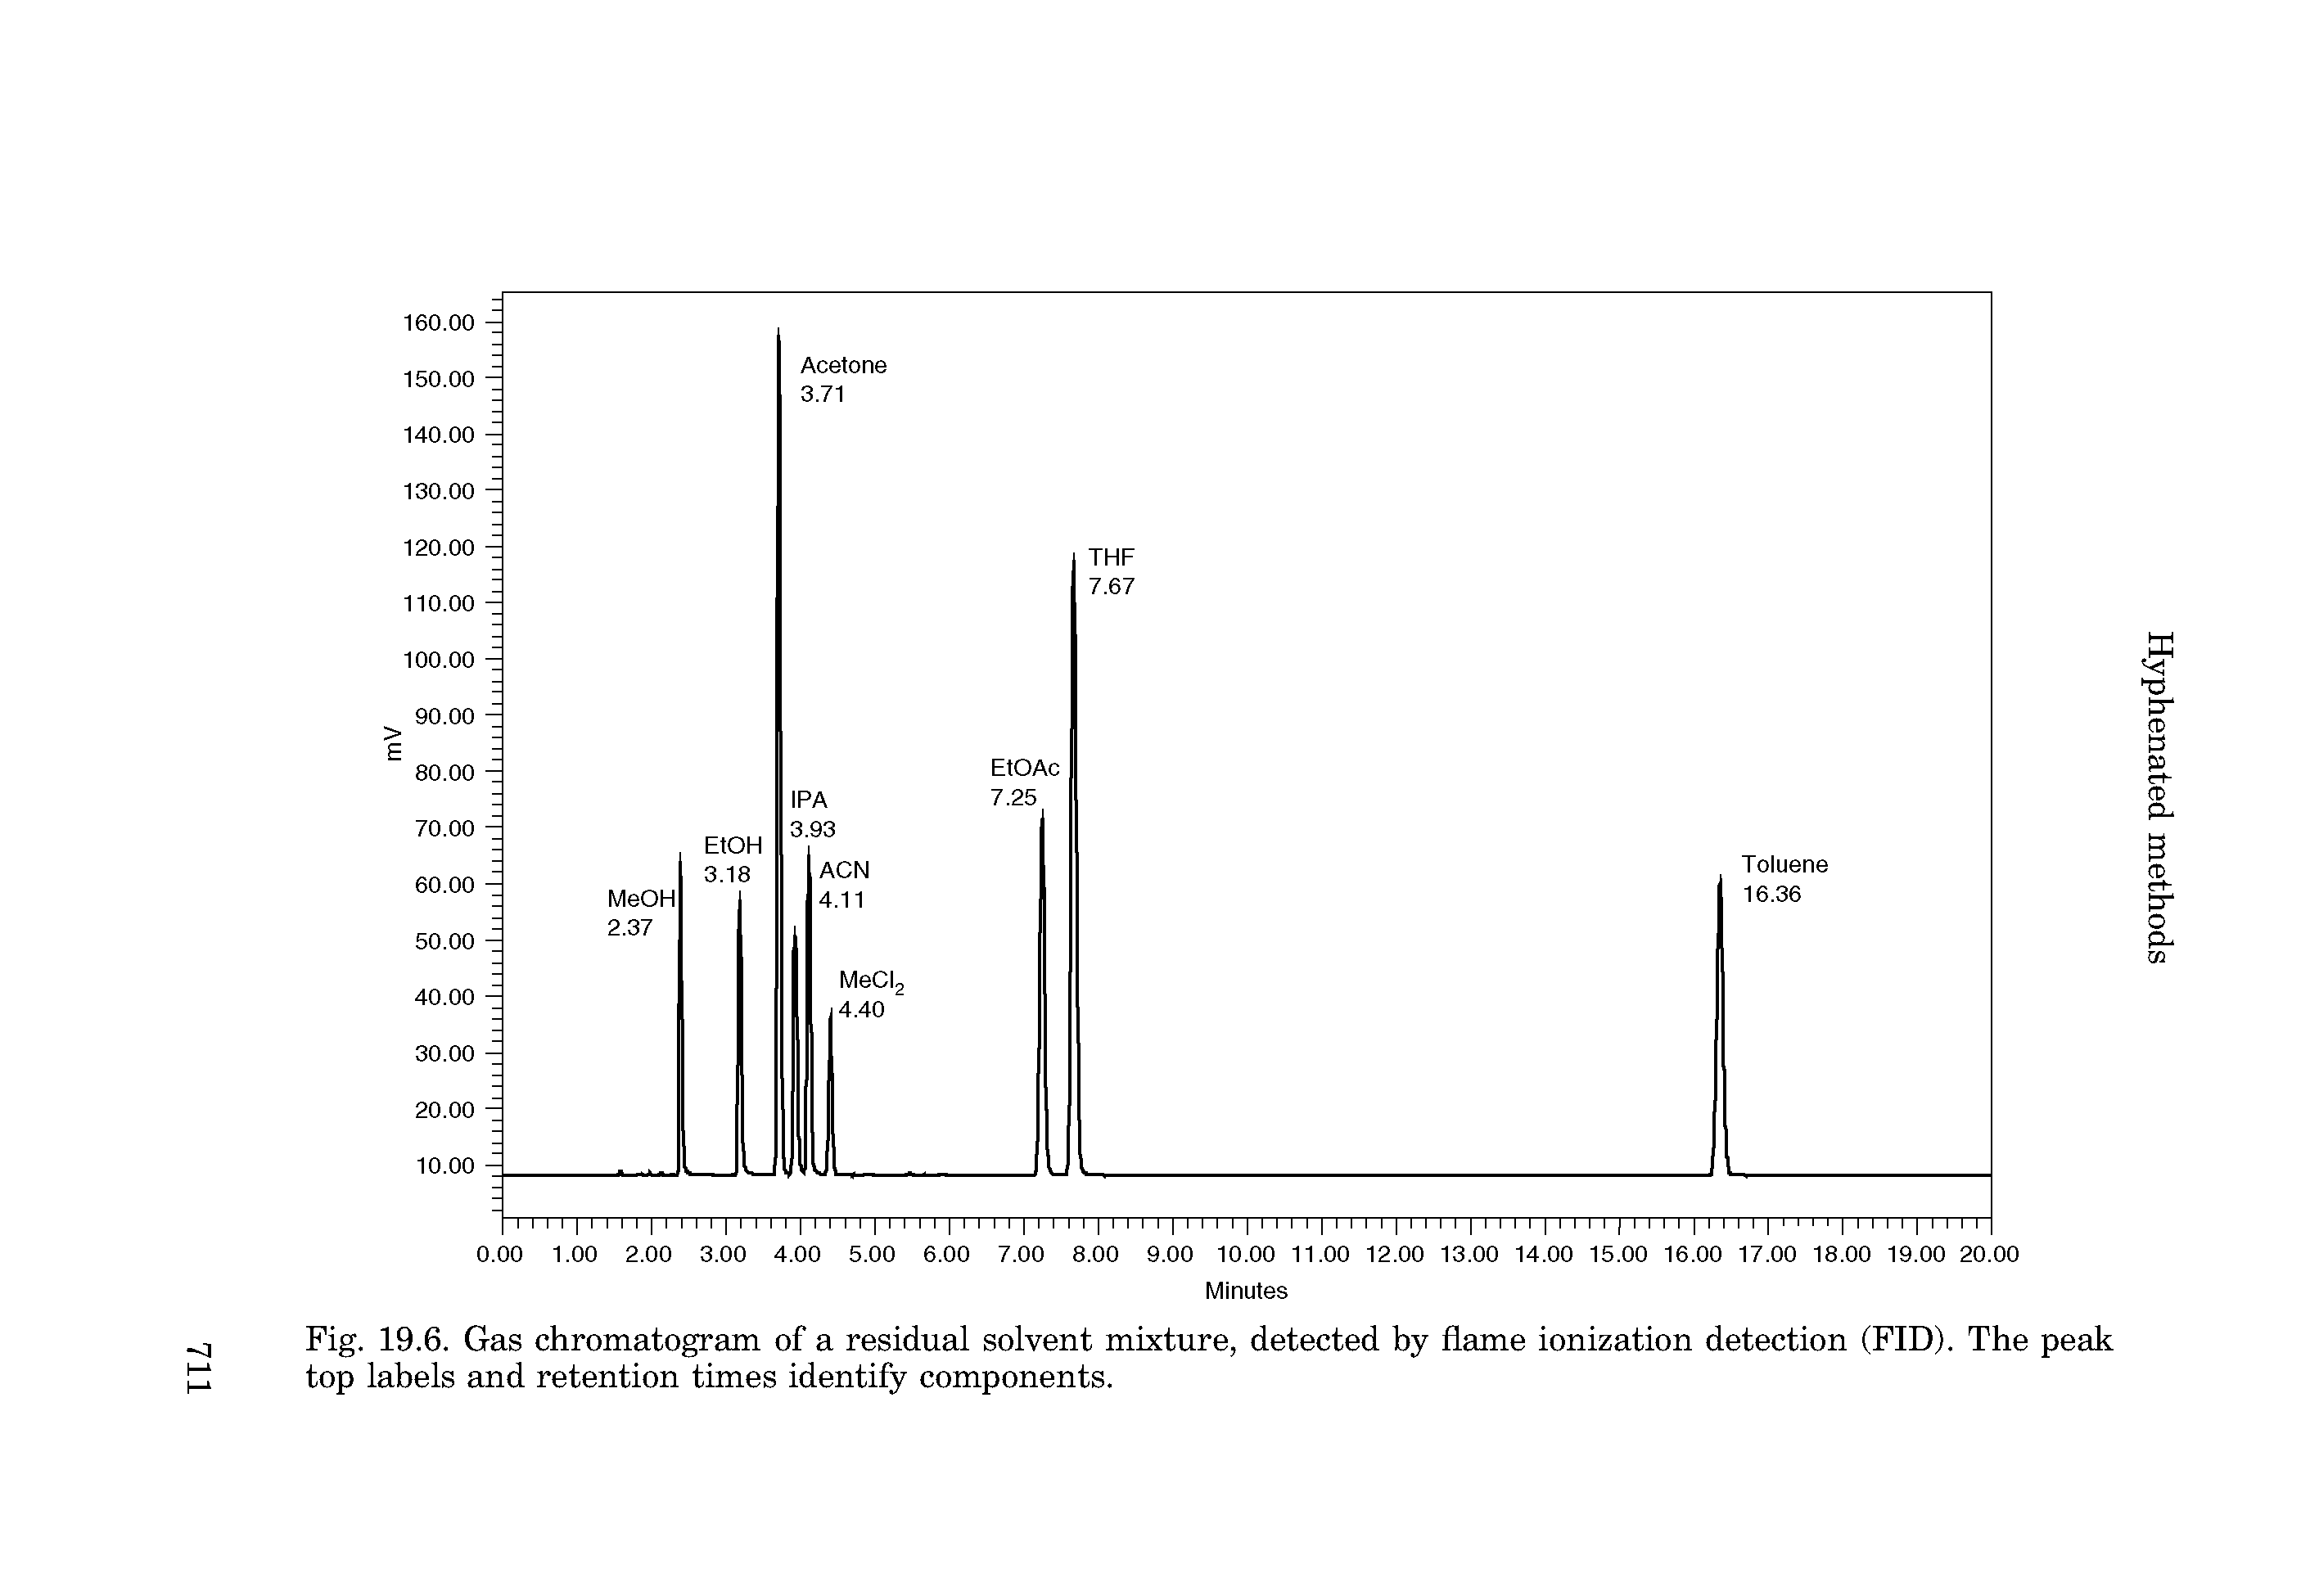 Fig. 19.6. Gas chromatogram of a residual solvent mixture, detected by flame ionization detection (FID). The peak top labels and retention times identify components.